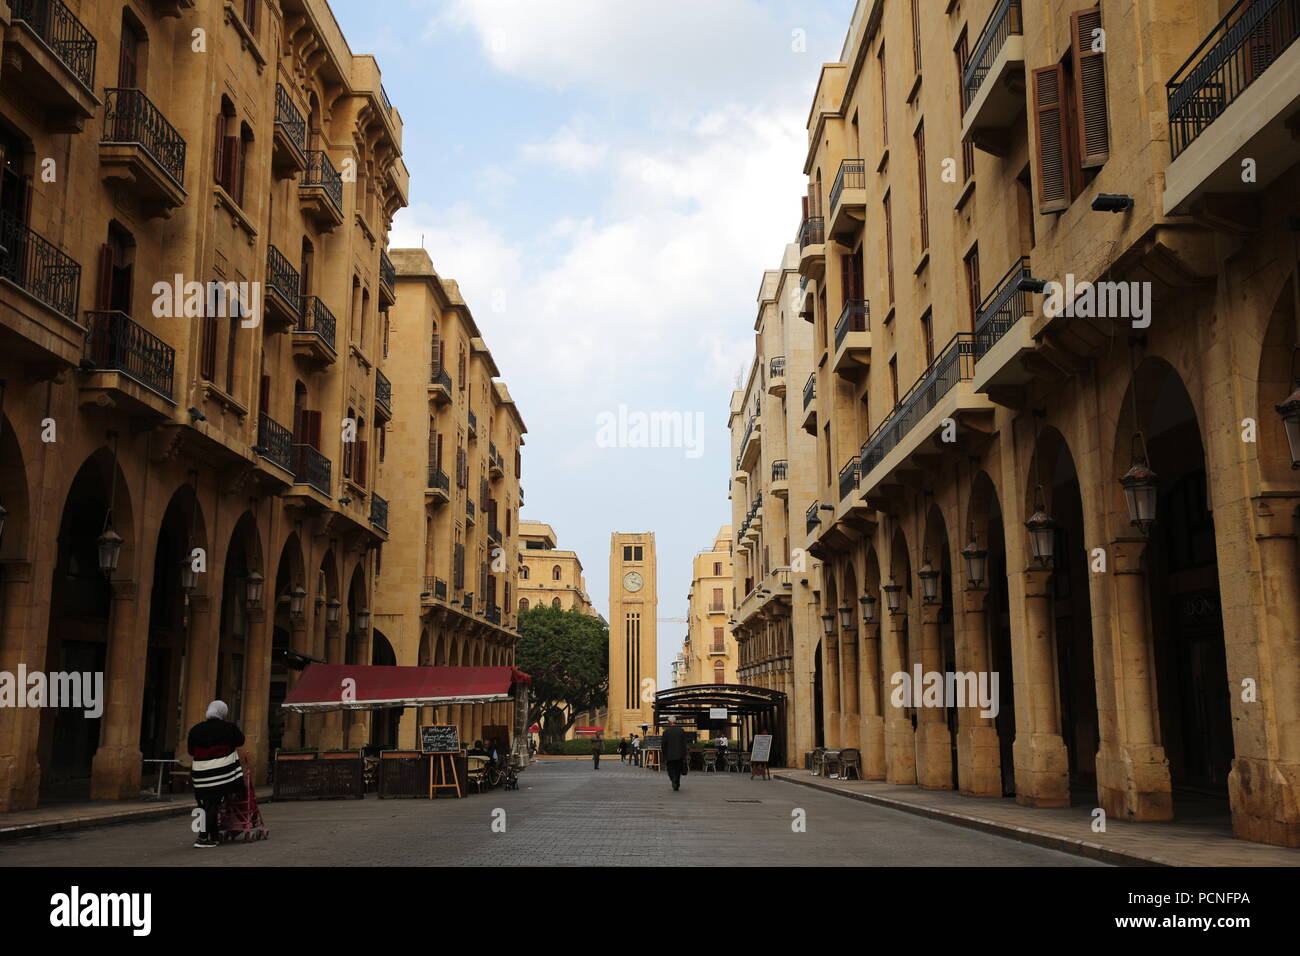 Beirut’s historical downtown was in ruins during Lebanon’s civil war. Now the city center features plush apartments, and restored historical buildings Stock Photo